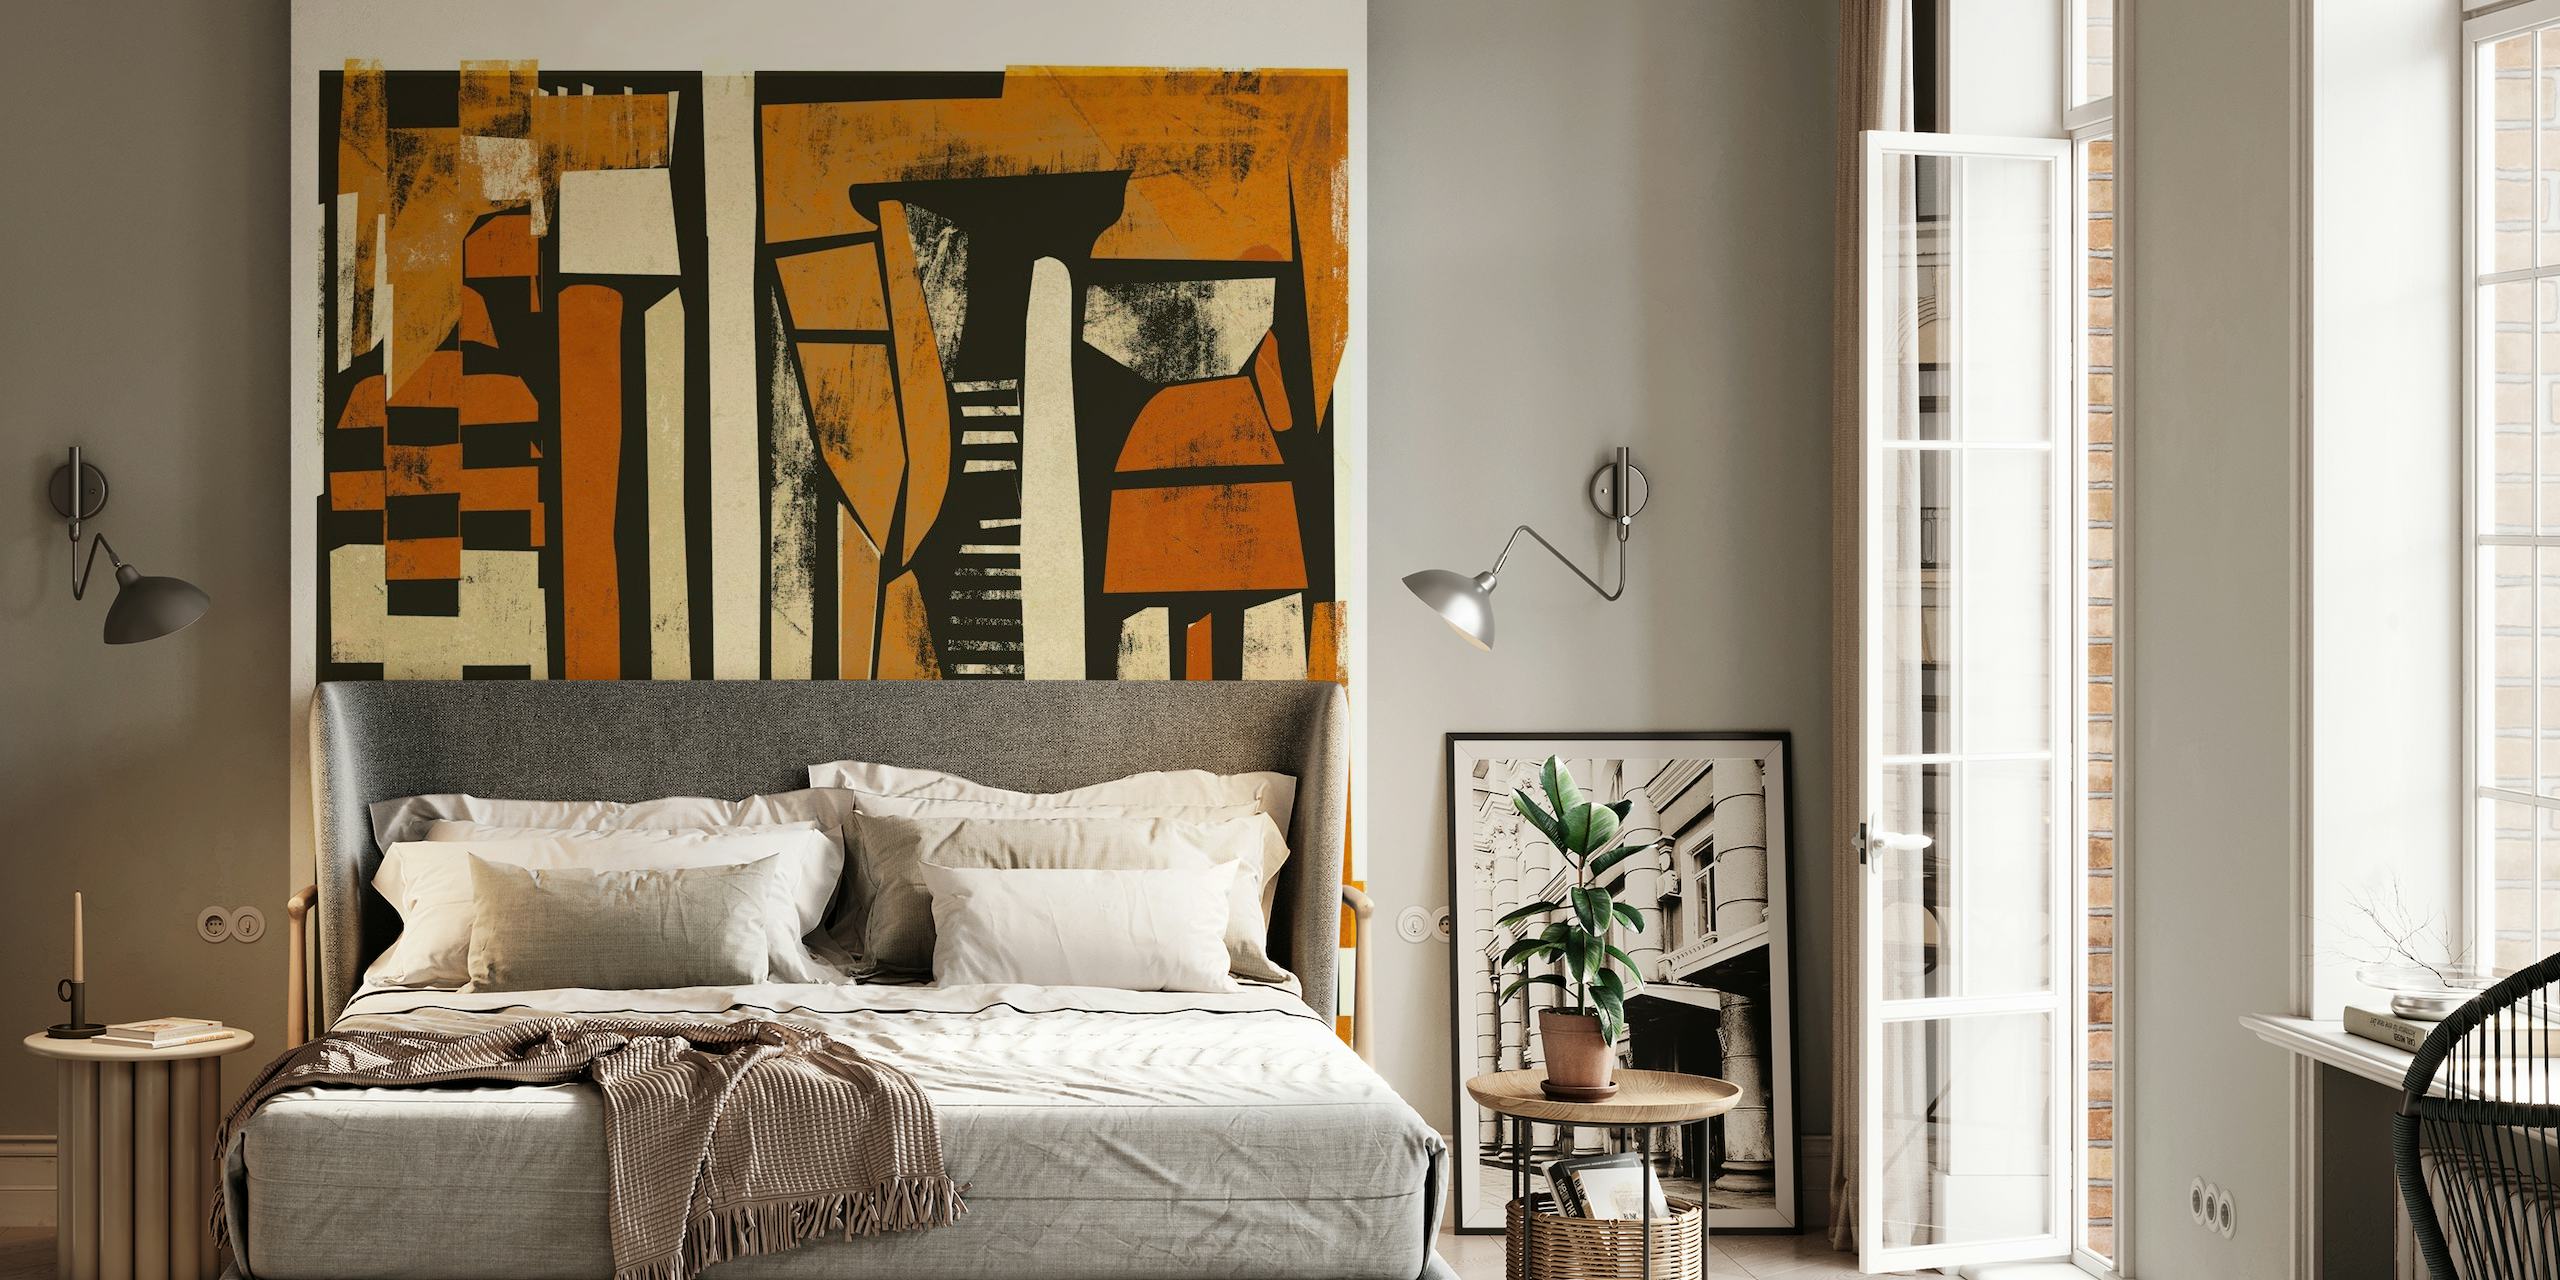 Abstract geometric shapes wall mural with earthy tones